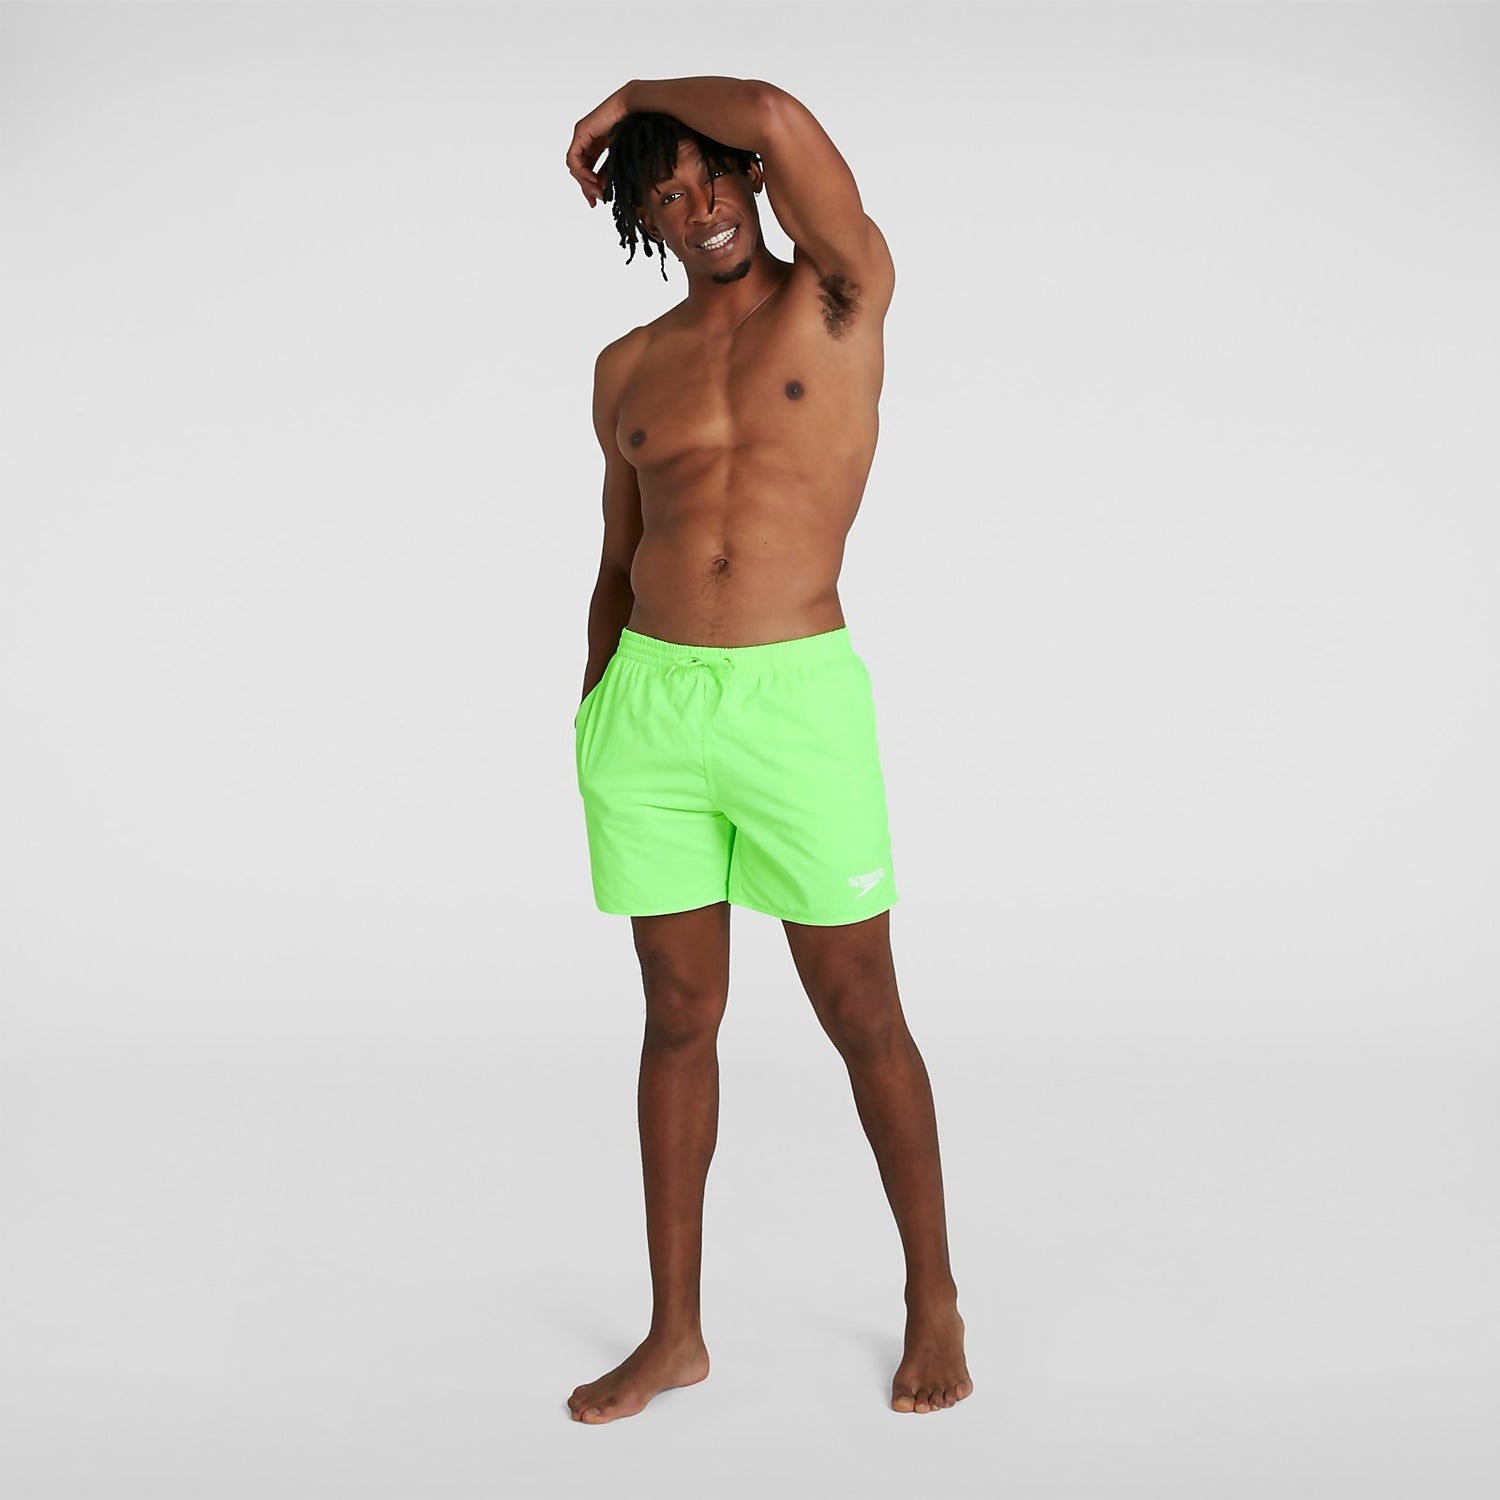 Details about   Speedo Costume Sea Man Scope 16 Watershort Lime Punch 